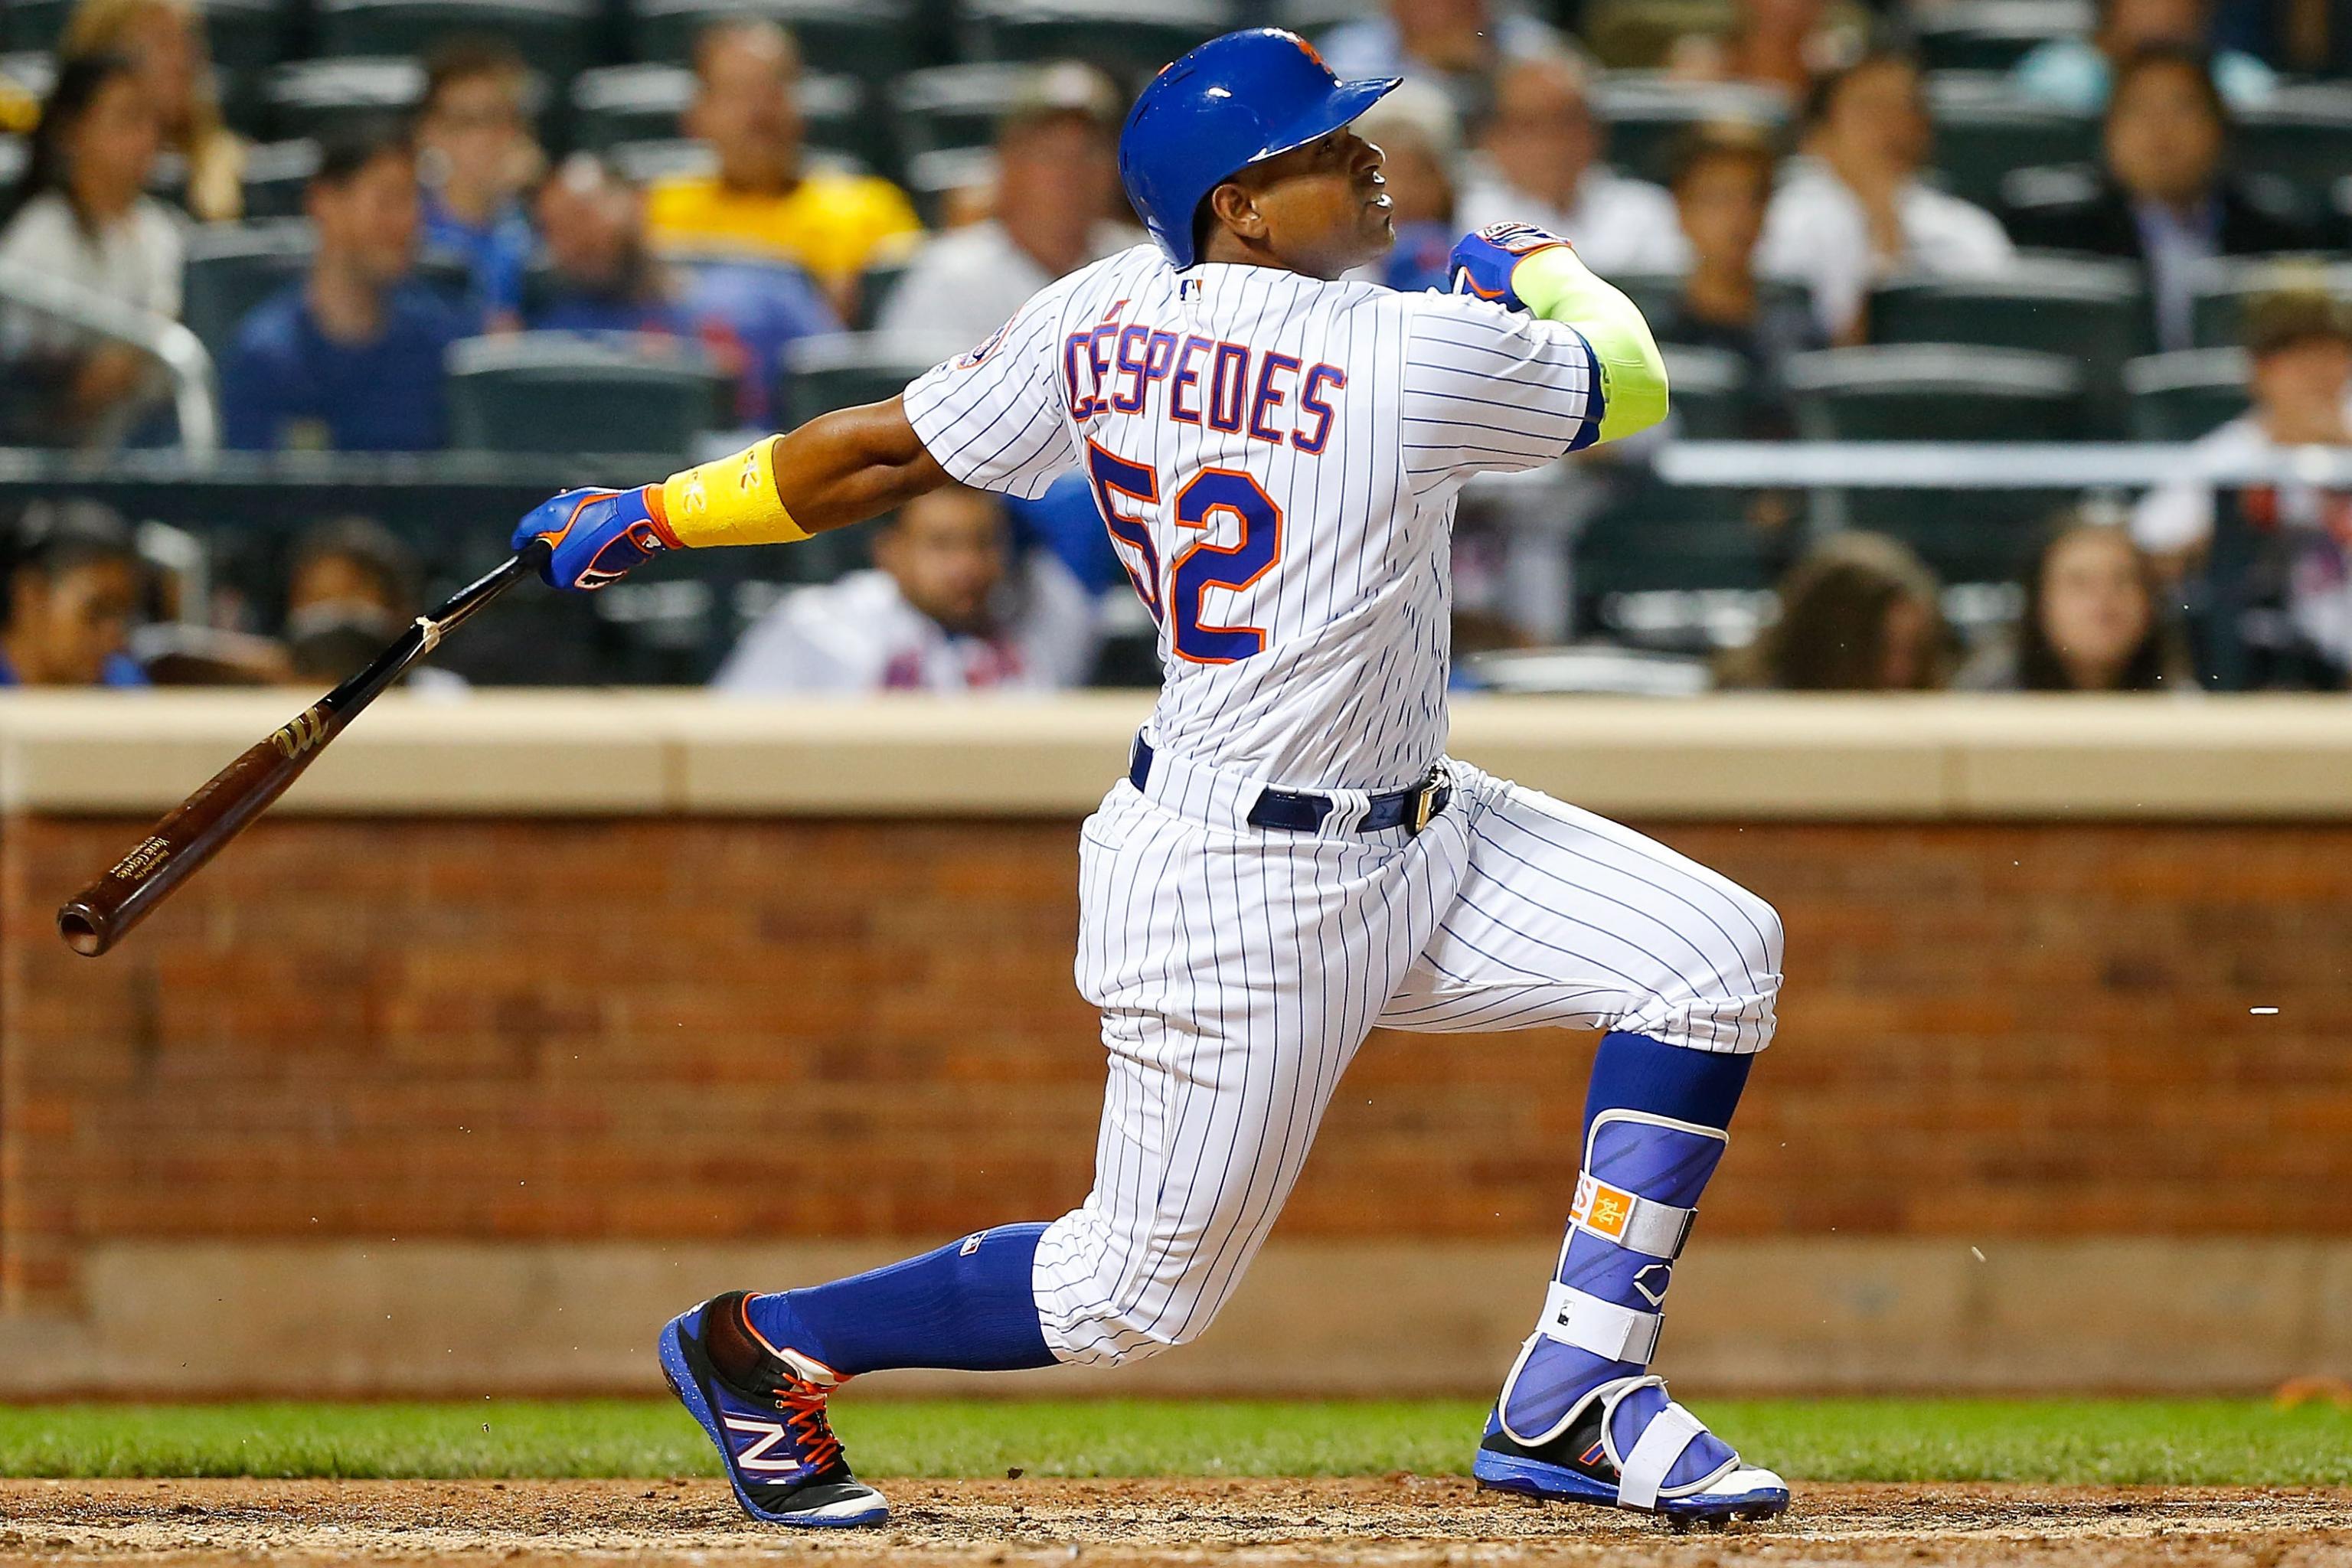 Yoenis Cespedes has joined the trend as the Mets become MLB's